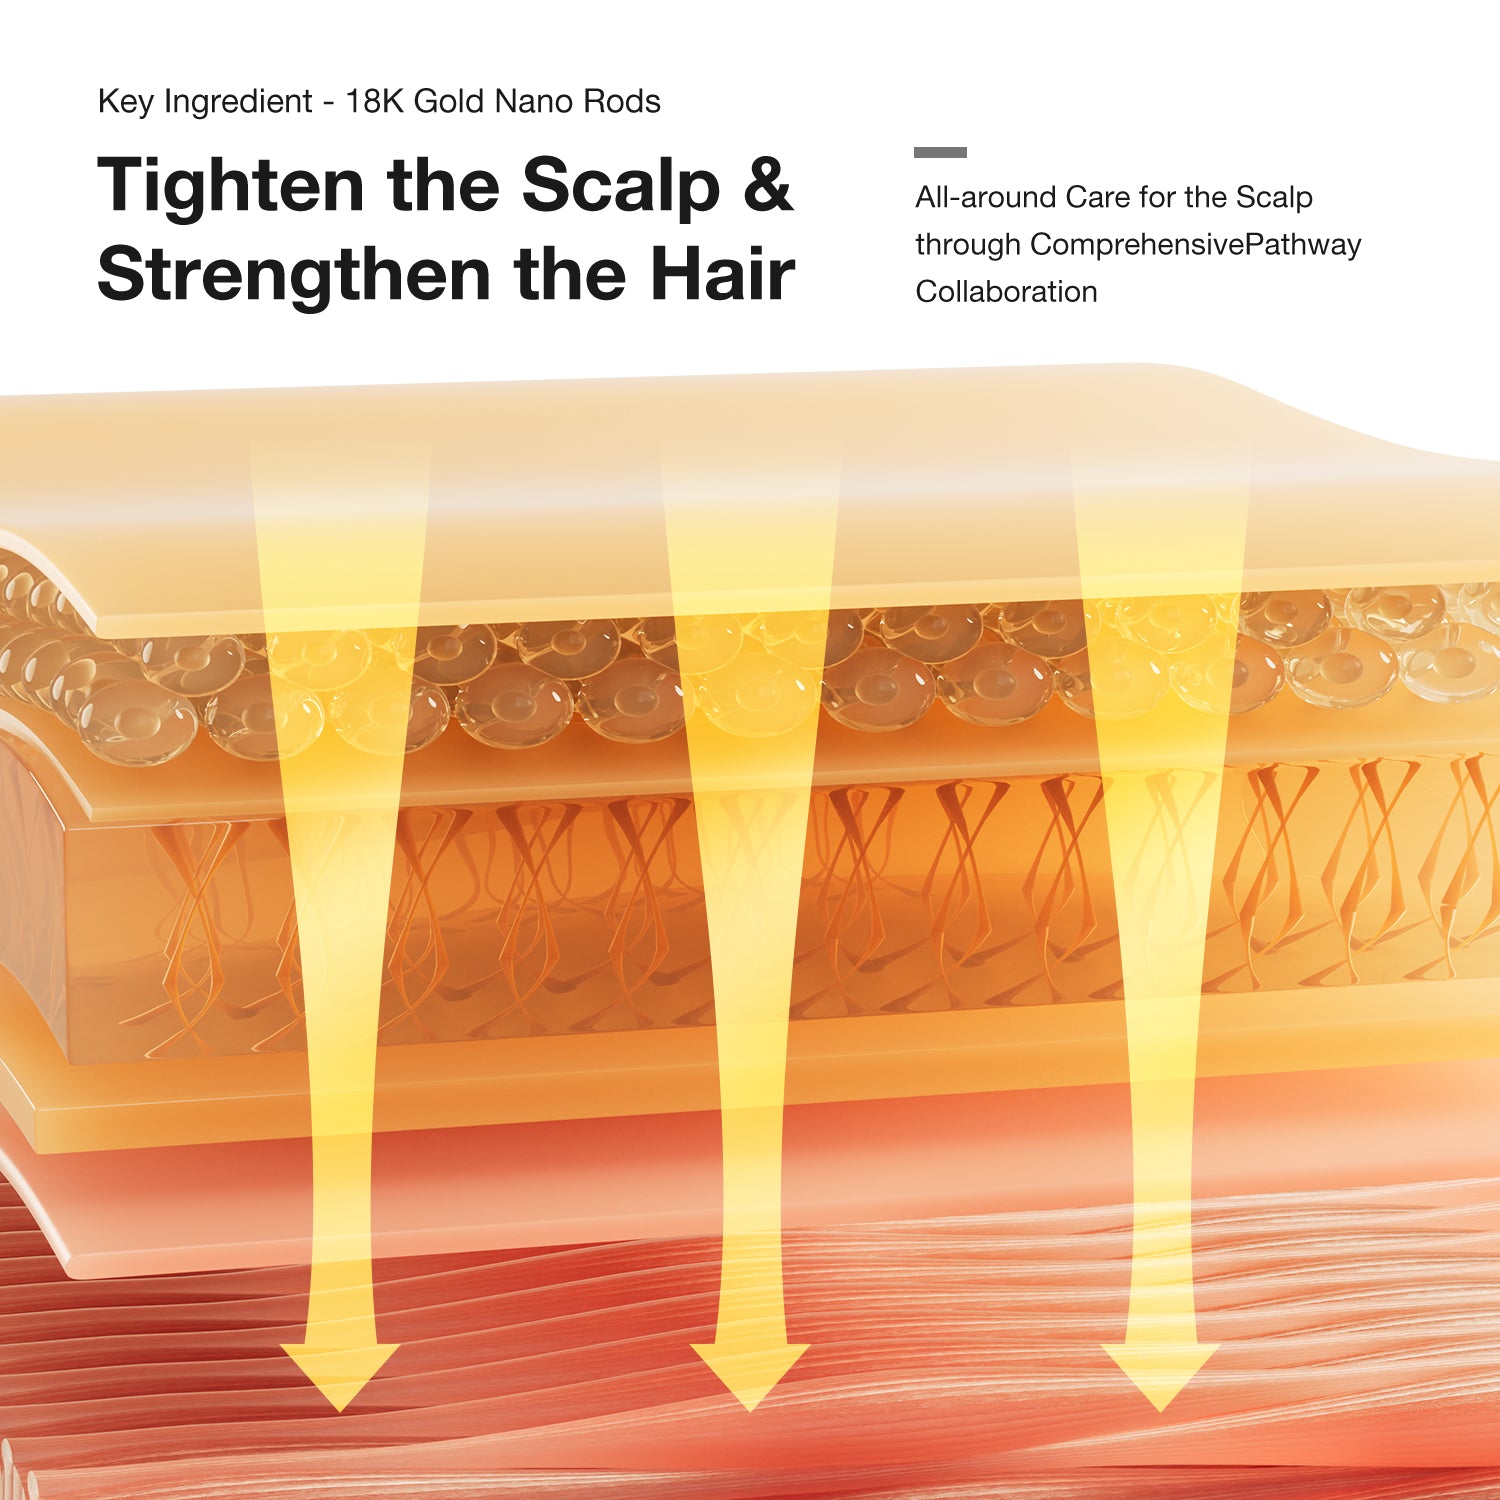 Innovative 18K Gold Nano Rods activating scalp tightening and hair strengthening.